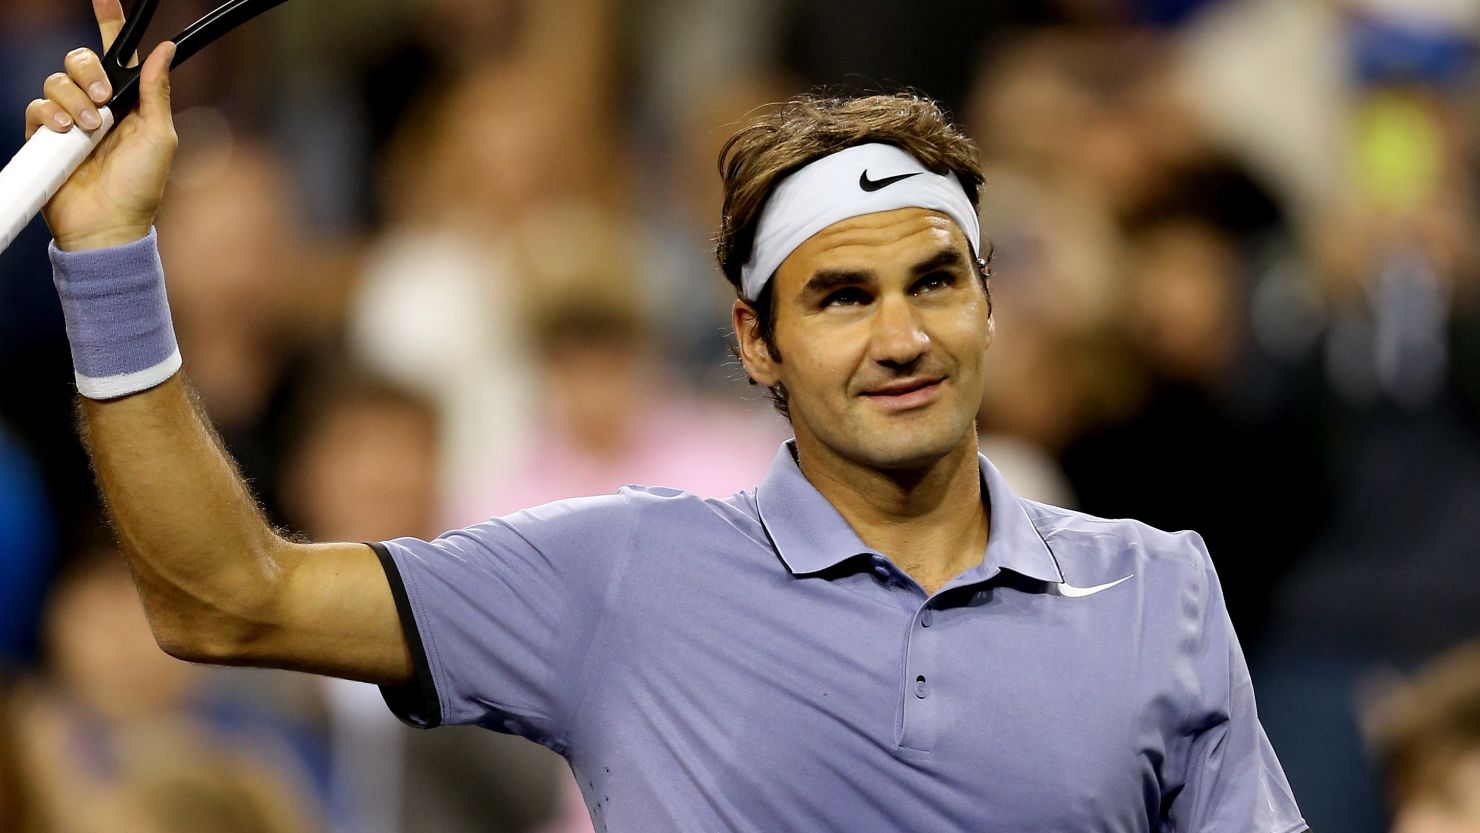 Roger Federer acknowledges the crowd after defeating Kevin Anderson of South Africa at Indian Wells.